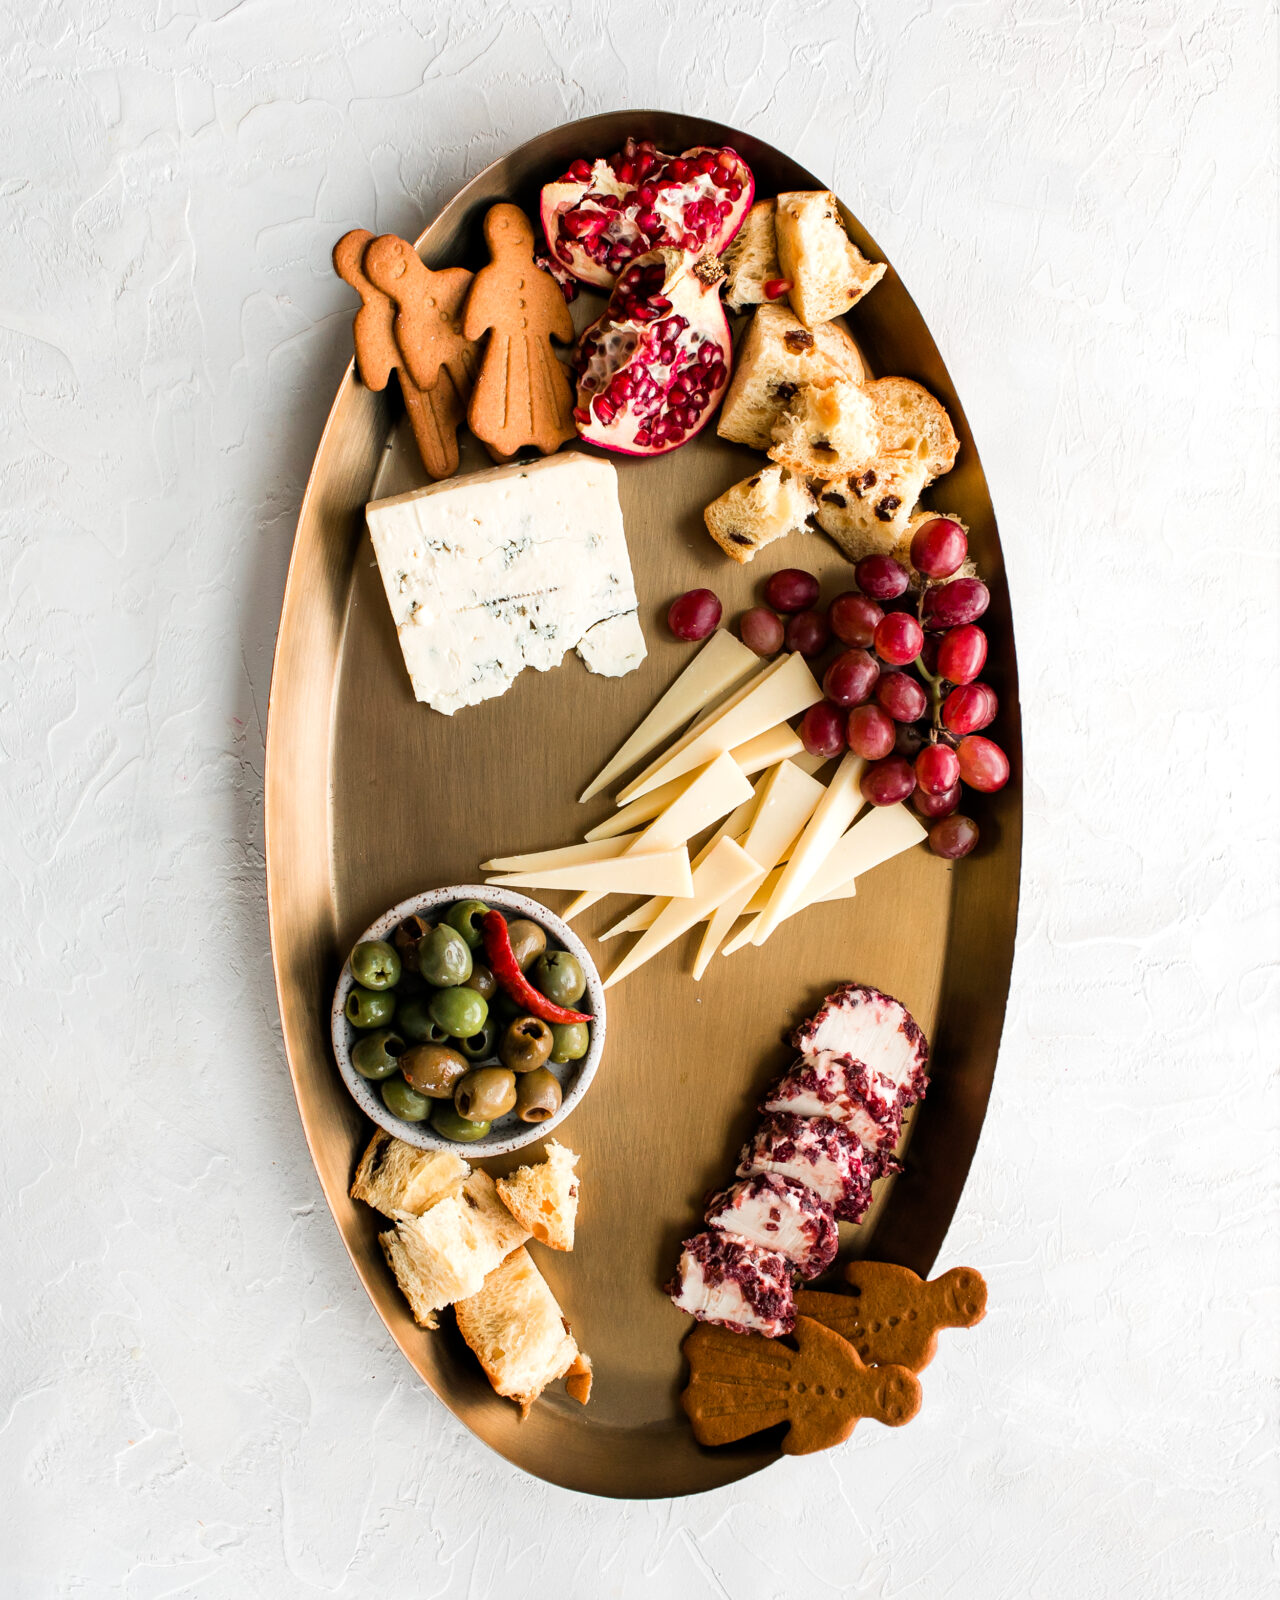 https://www.rothcheese.com/wp-content/uploads/2021/11/Roth_Beauty_Cheeseboard_HowToBuildAHolidayCheeseboard_03-1280x1600.jpg